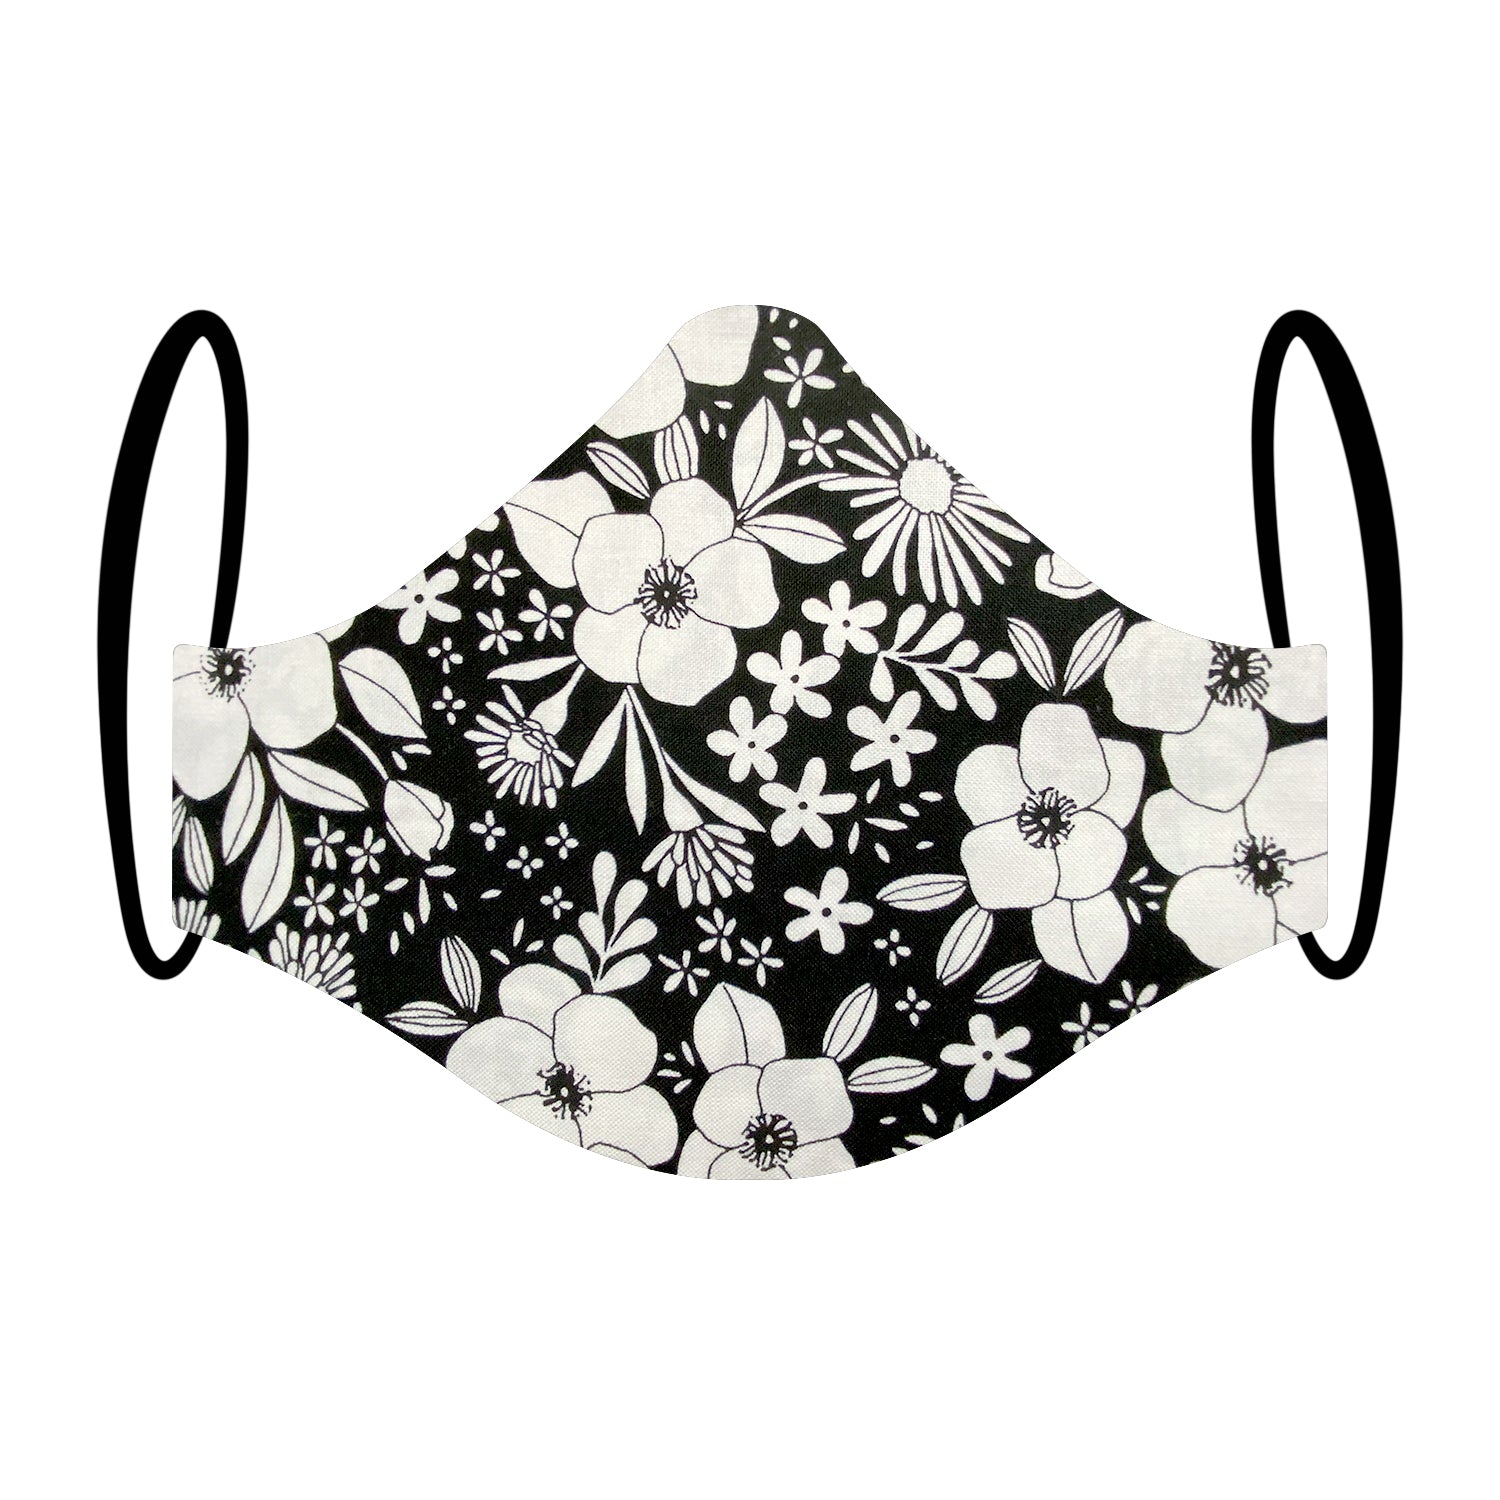 "Ebony and Ivory" Monochrome Floral Print Triple-layer Washable Face Mask